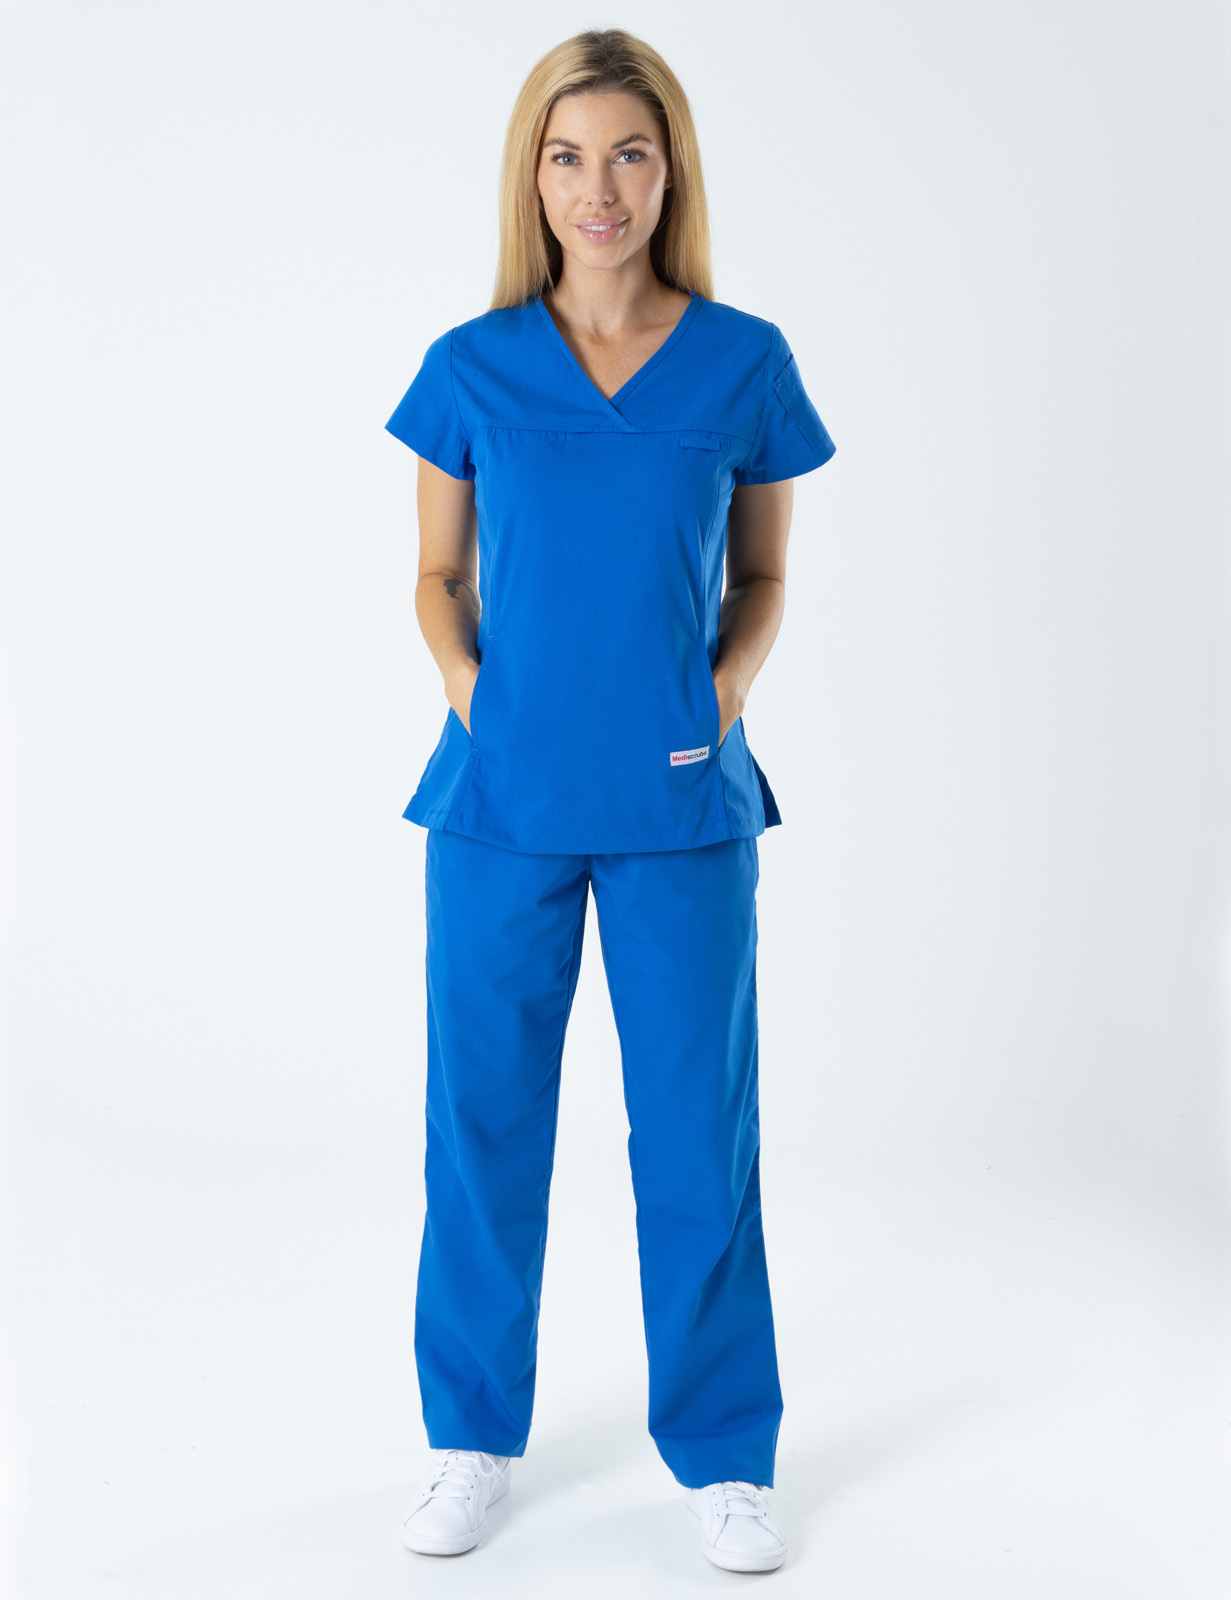 Nambour Hospital - MI Radiographer (Women's Fit Solid Scrub Top and Cargo Pants in Royal incl Logos)